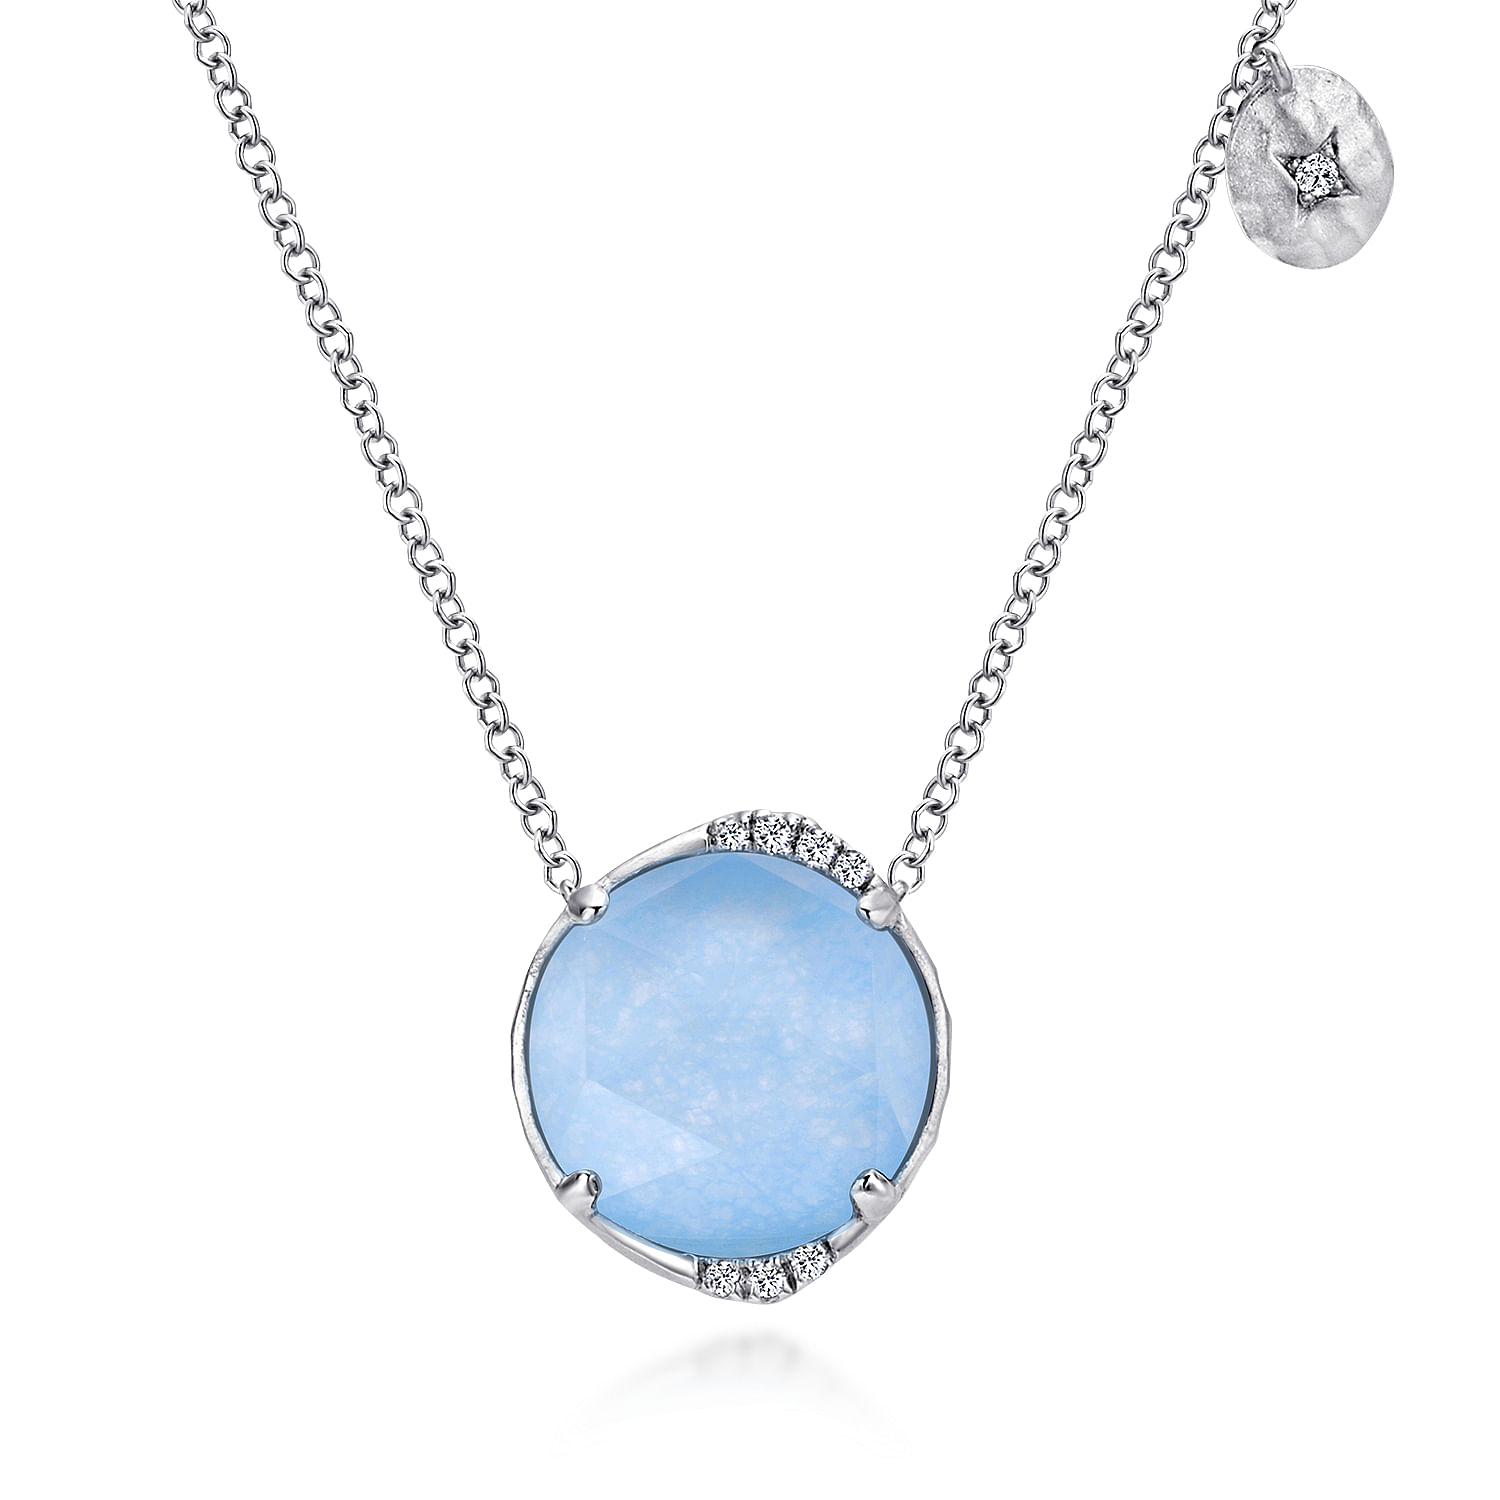 Gabriel - 925 Sterling Silver Rock Crystal/Blue Jade and Diamond Pendant Necklace